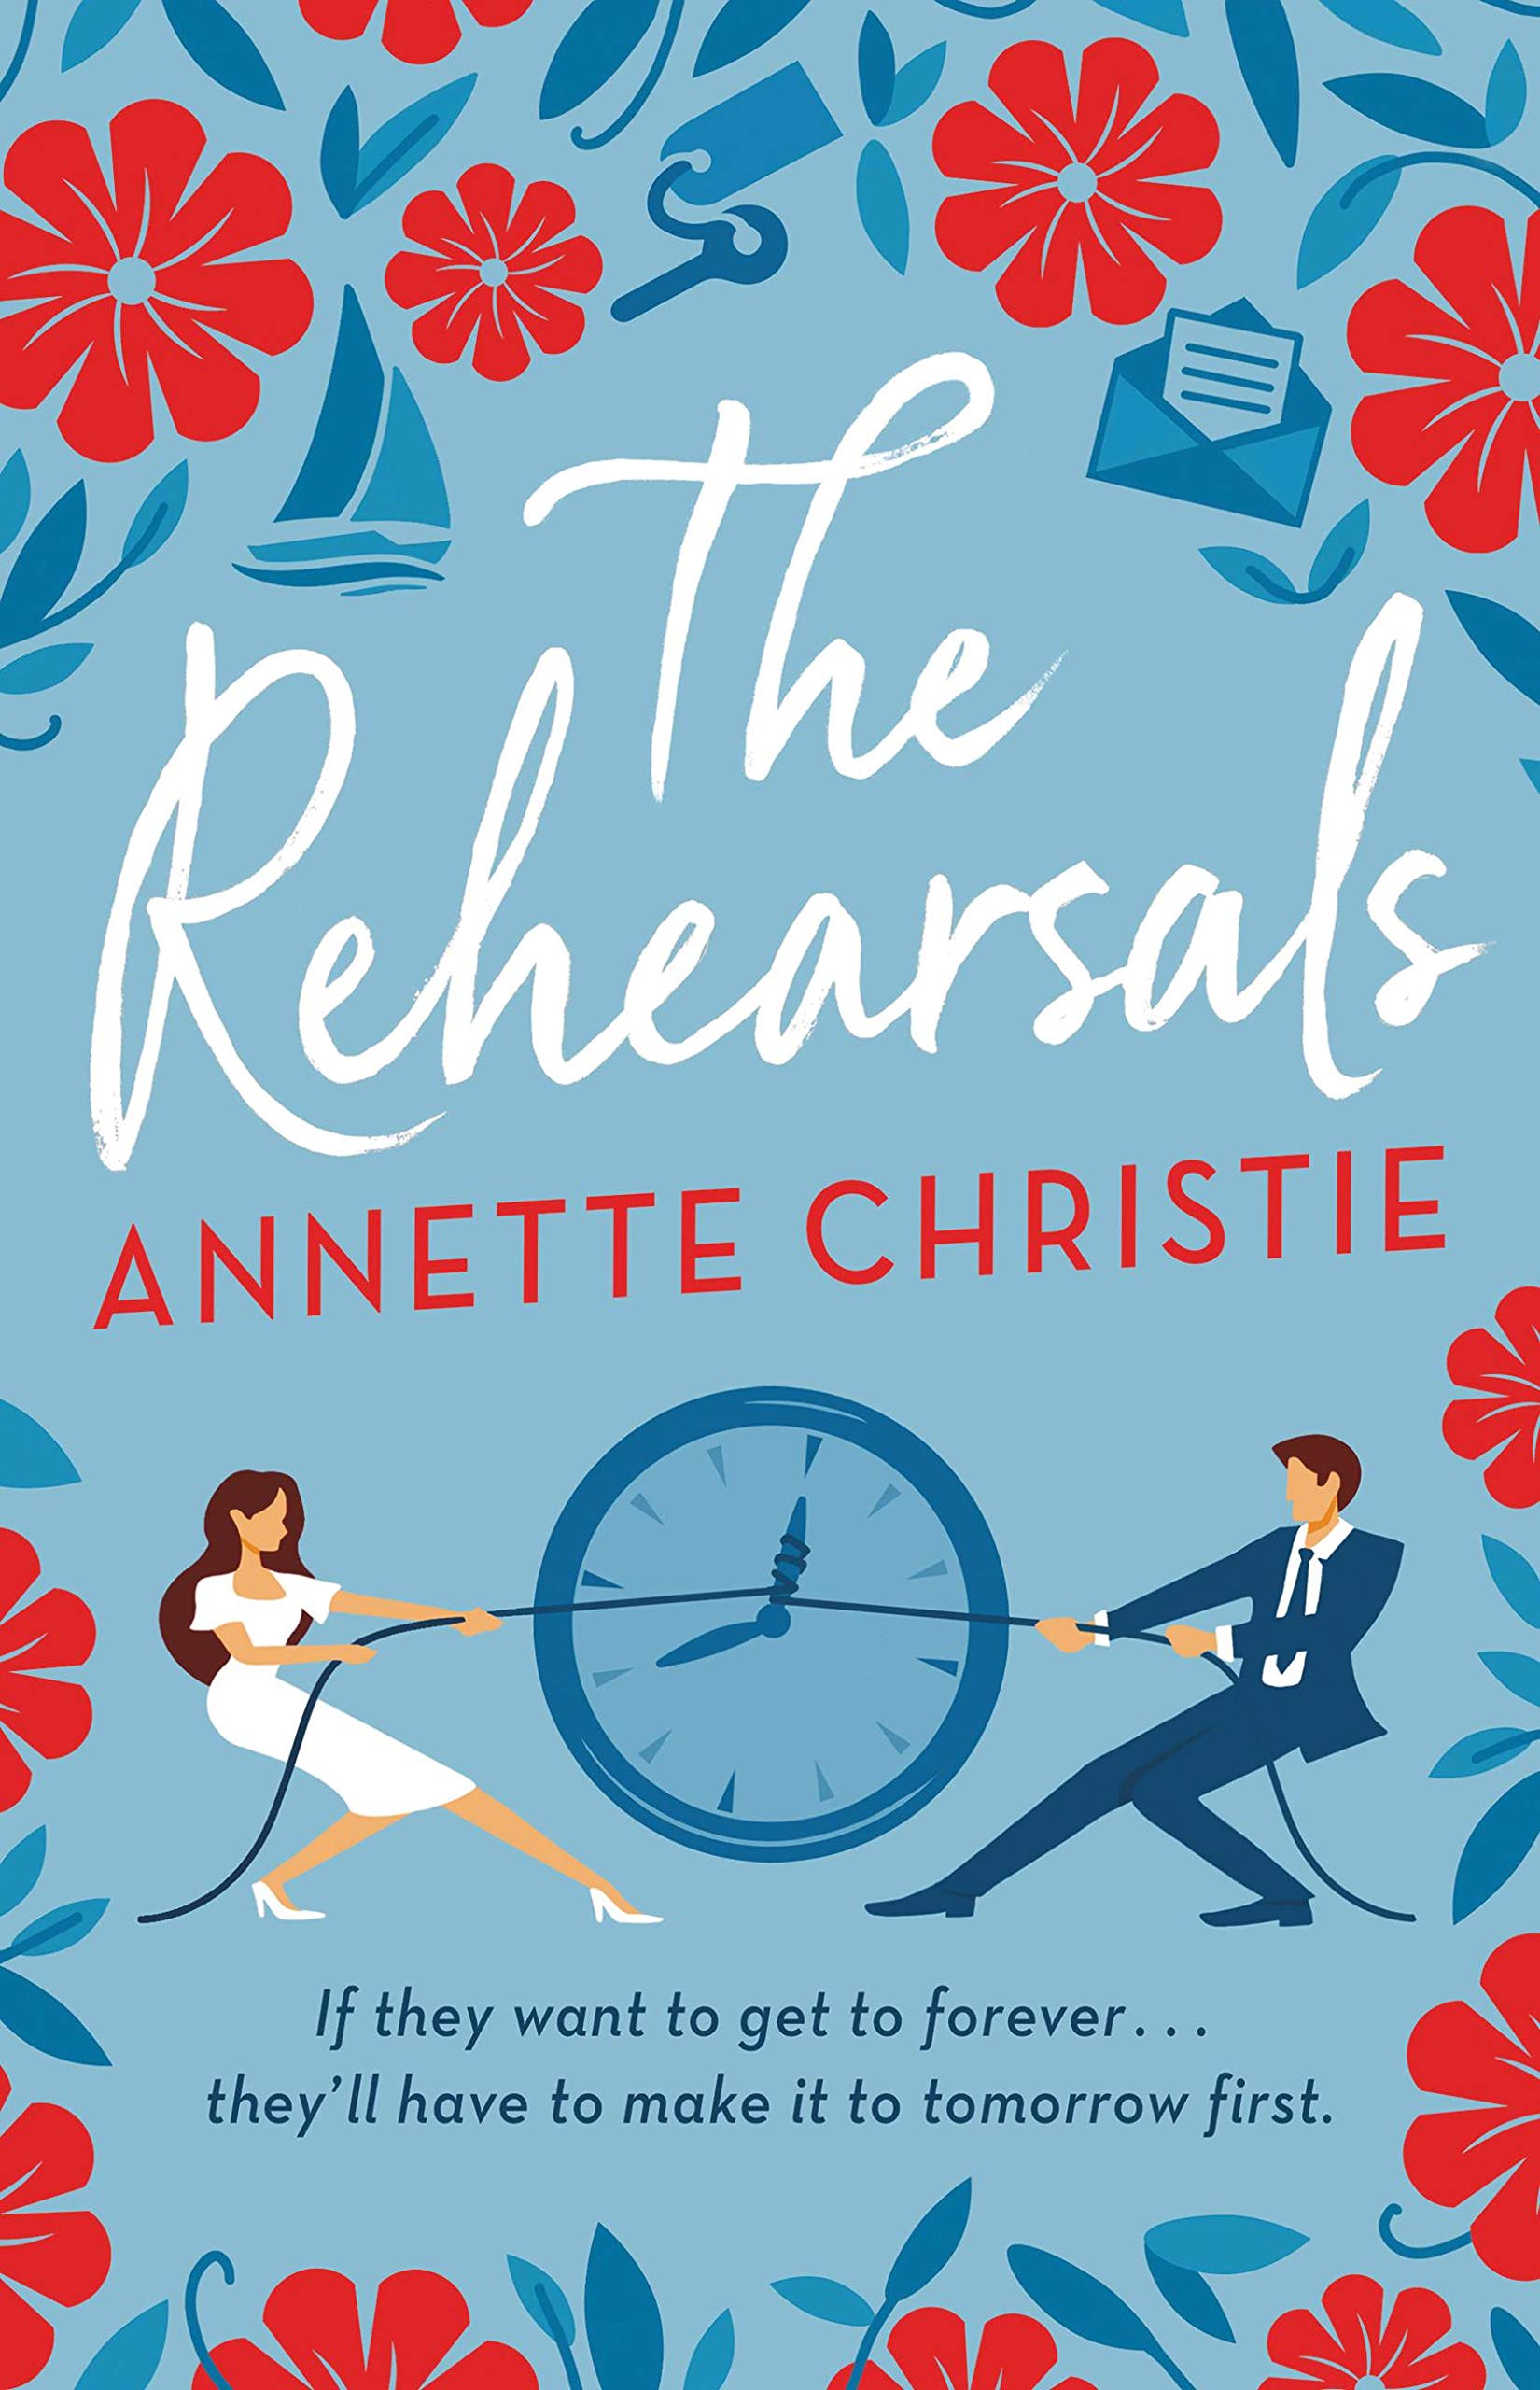 Image for "The Rehearsals"